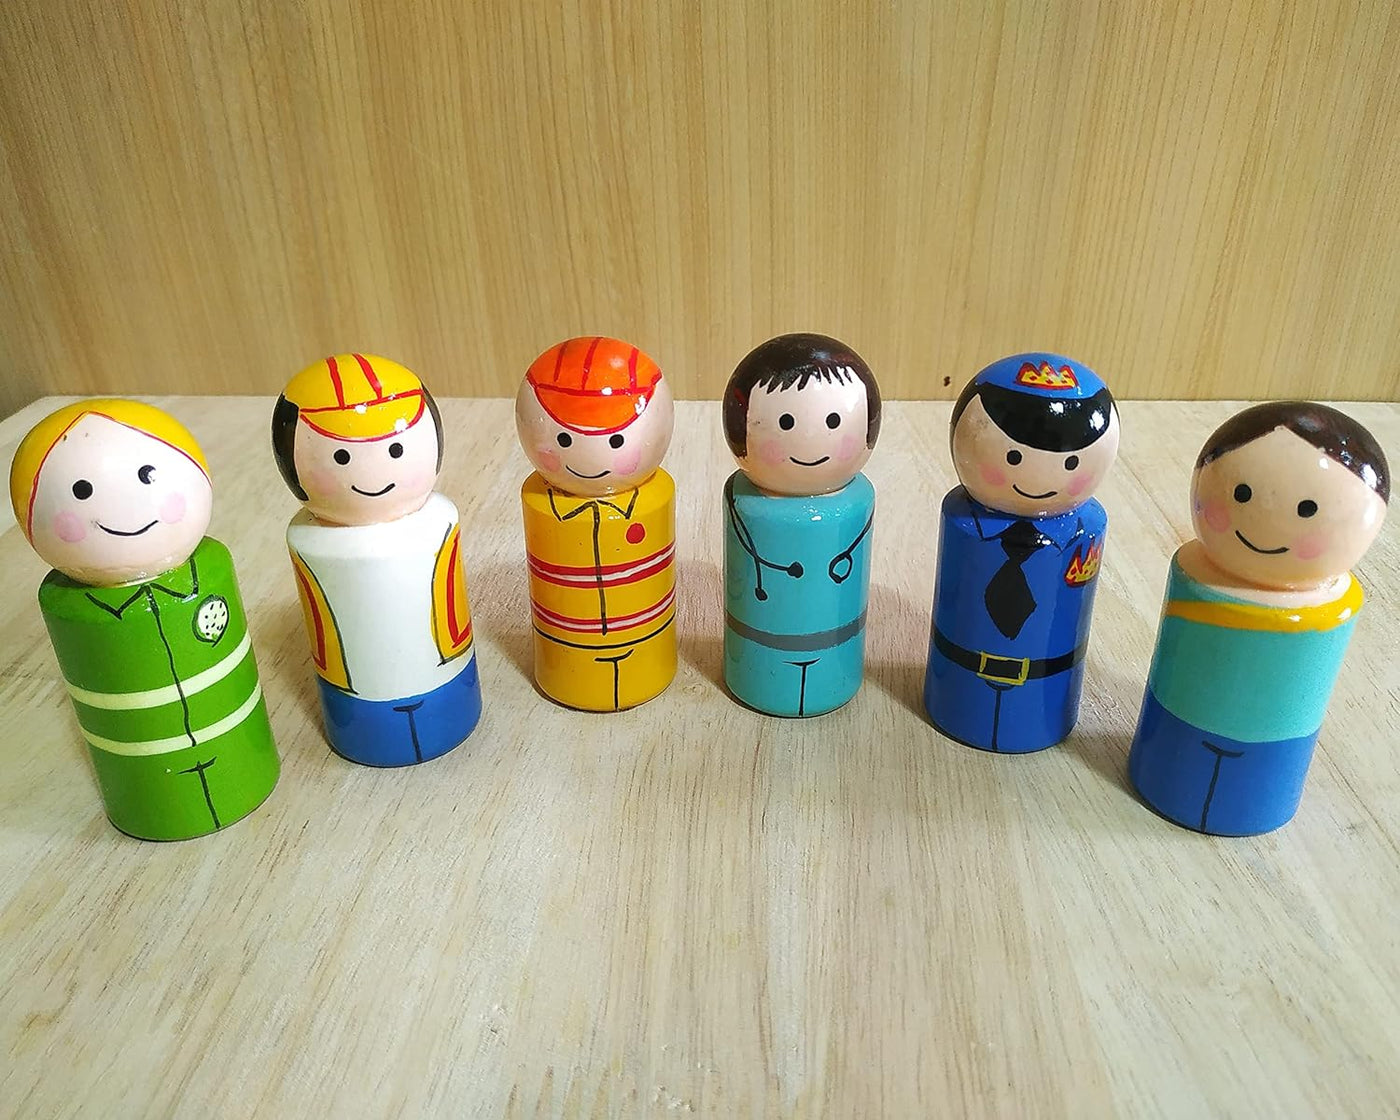 Peg Dolls Wooden Essential Workers/Community Helpers Pretend Play Figurines - Colorful Dolls for Kids & Toddlers (2 Years+) - Pack of 6 pcs - Open Ended Toys